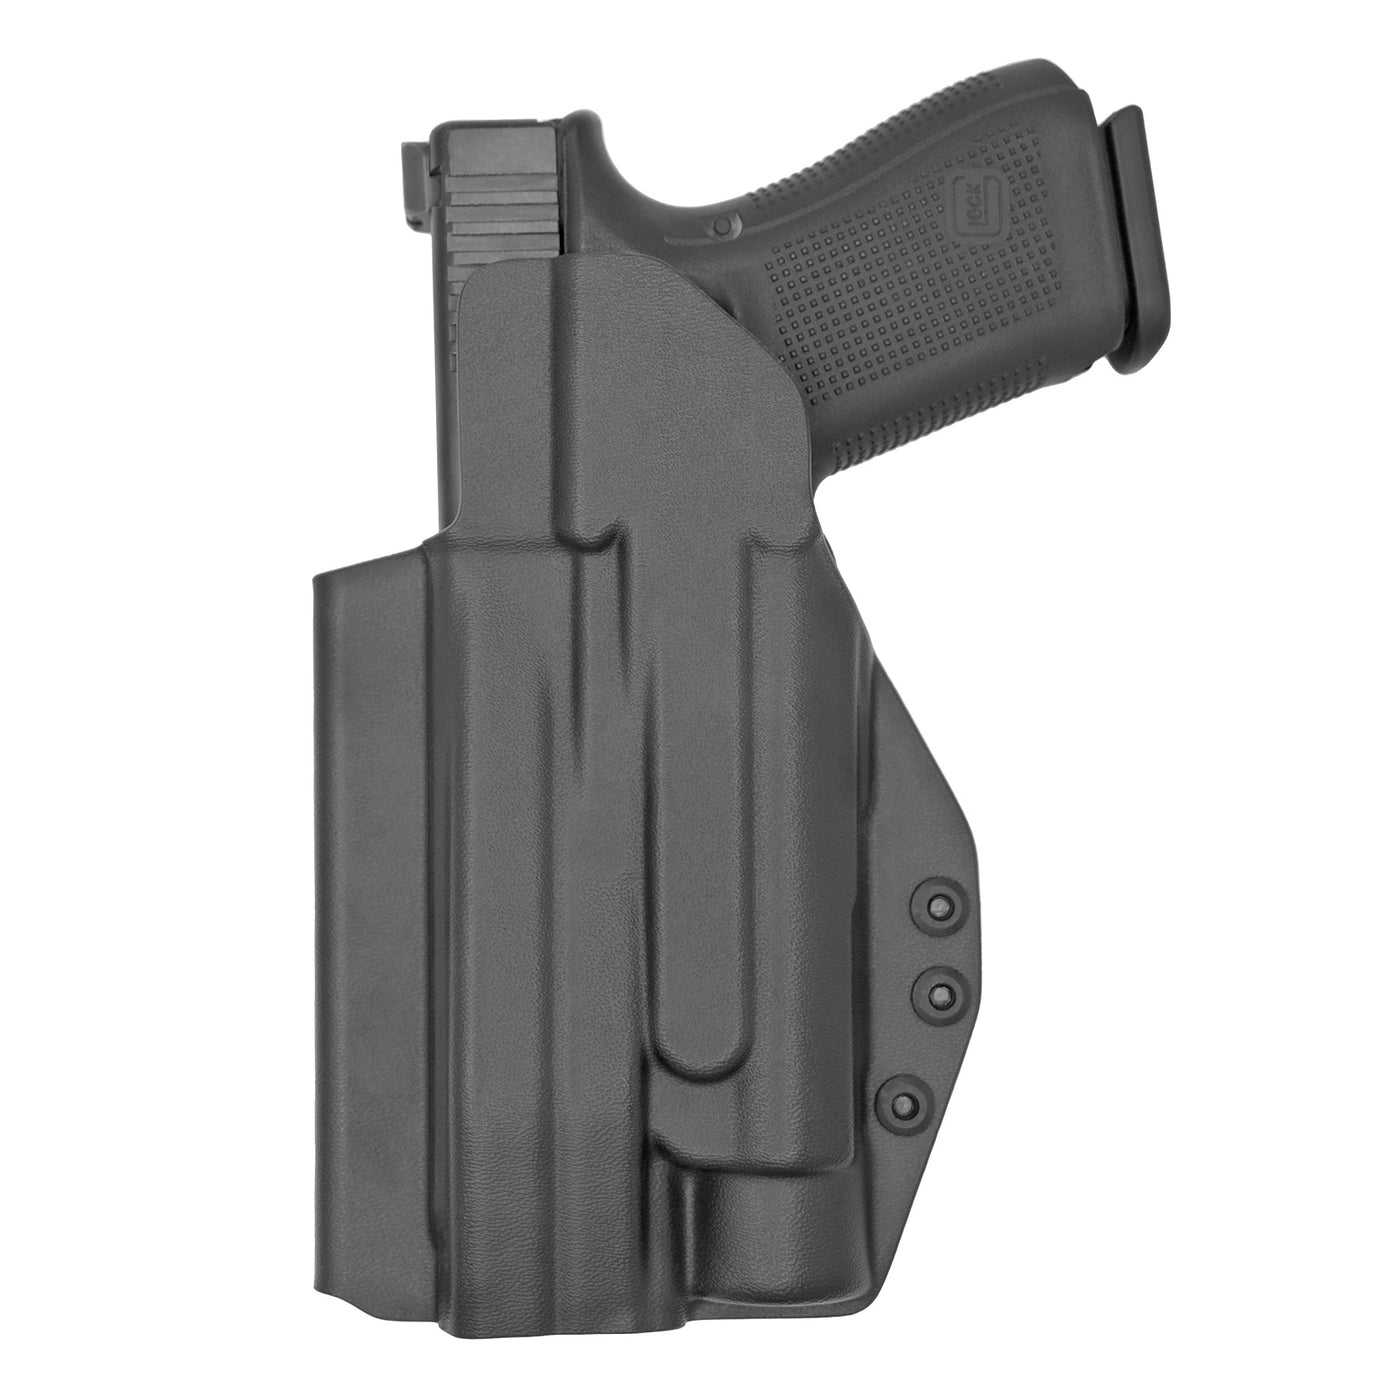 C&G Holsters custom IWB Tactical Glock 20/21 Streamlight TLR1 in holstered position back view